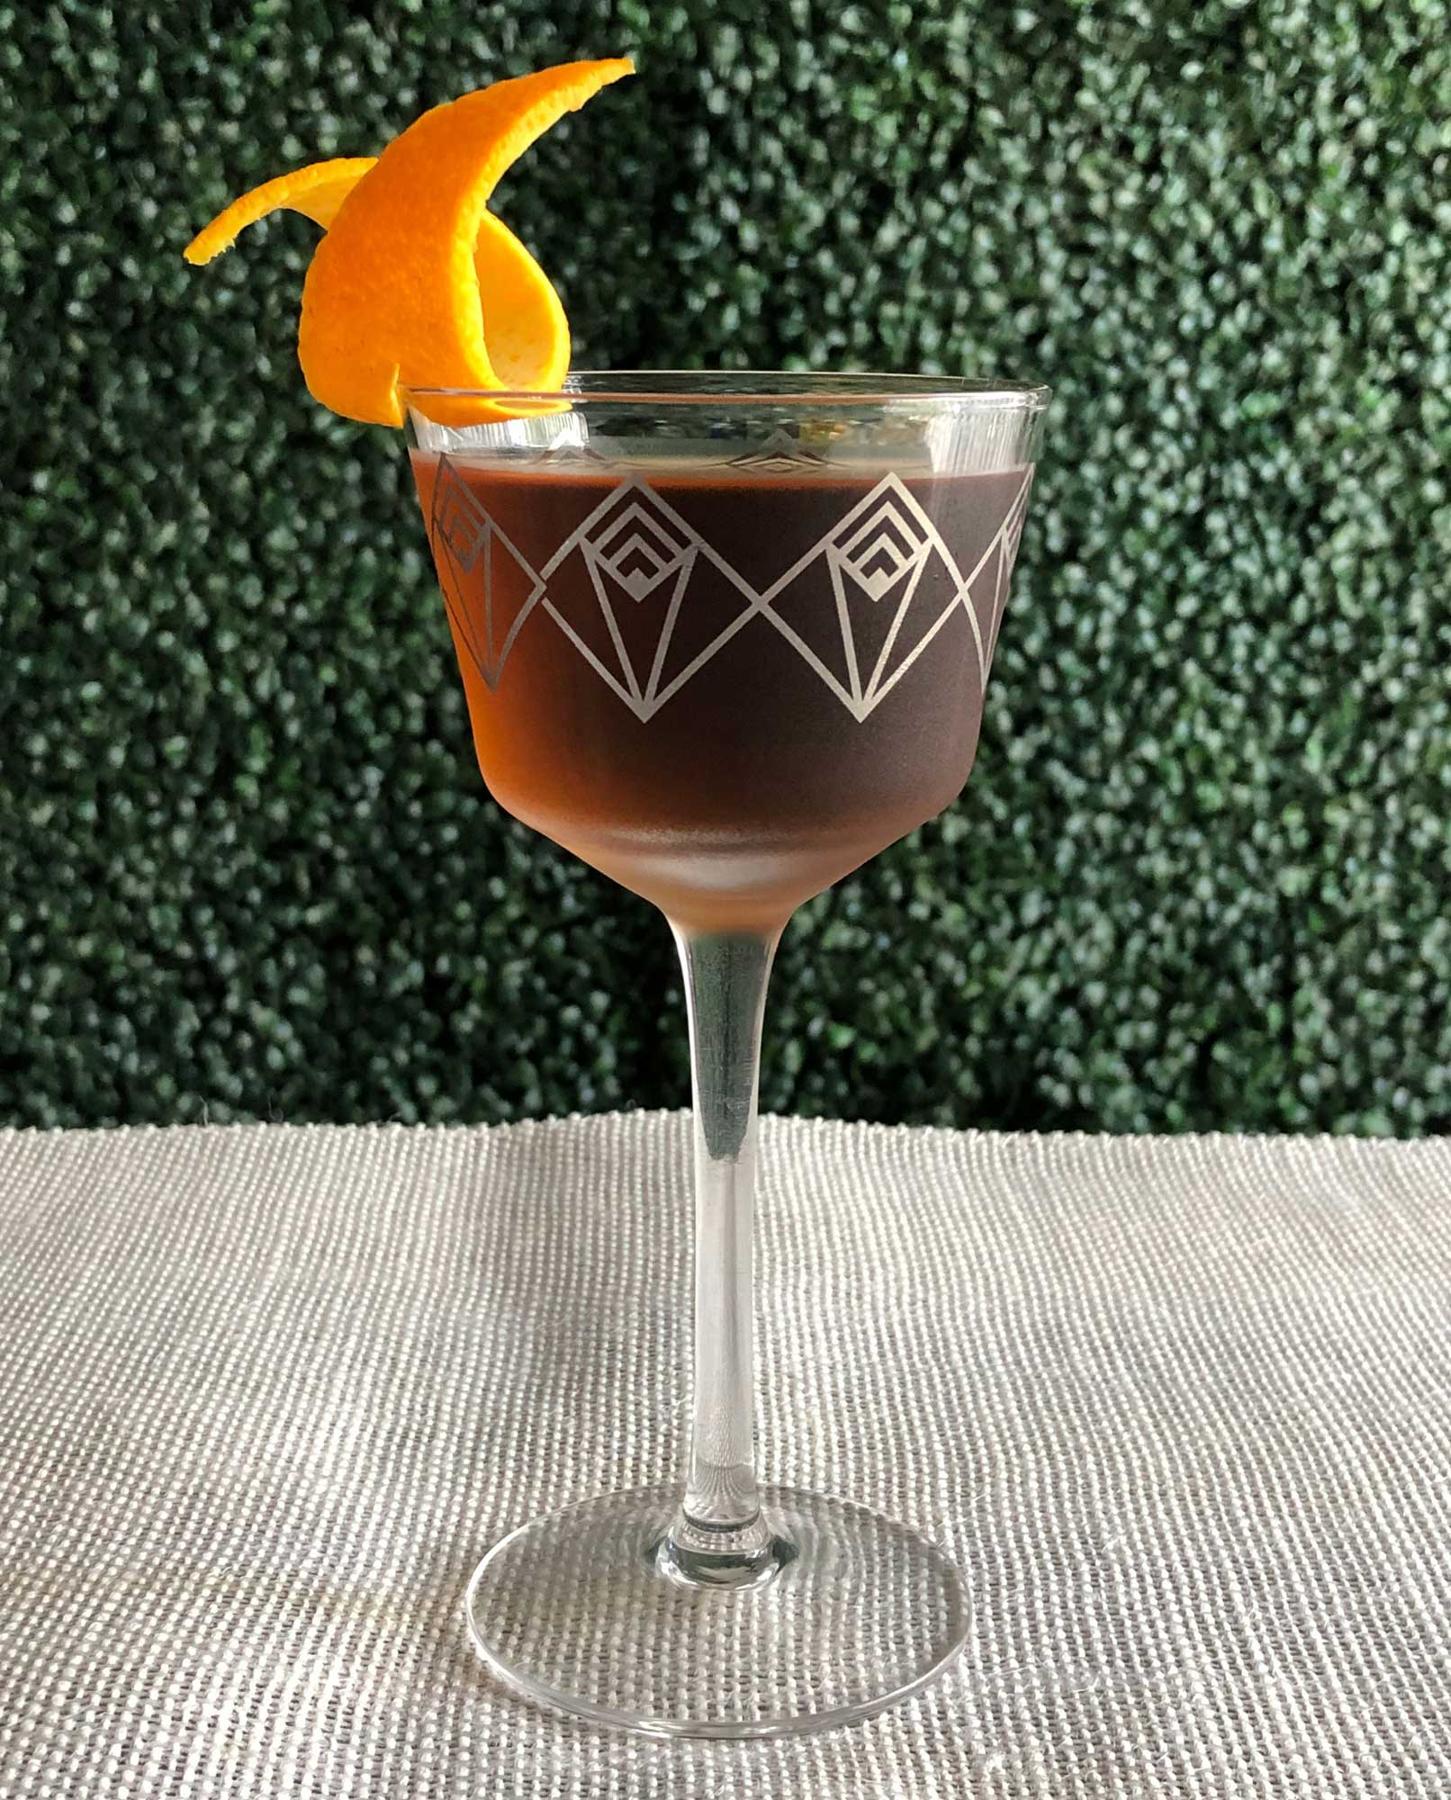 An example of the Bonal Martinez, the mixed drink (drink) featuring Hayman’s Old Tom Gin, Bonal Gentiane-Quina, maraschino liqueur, and orange twist; photo by Lee Edwards